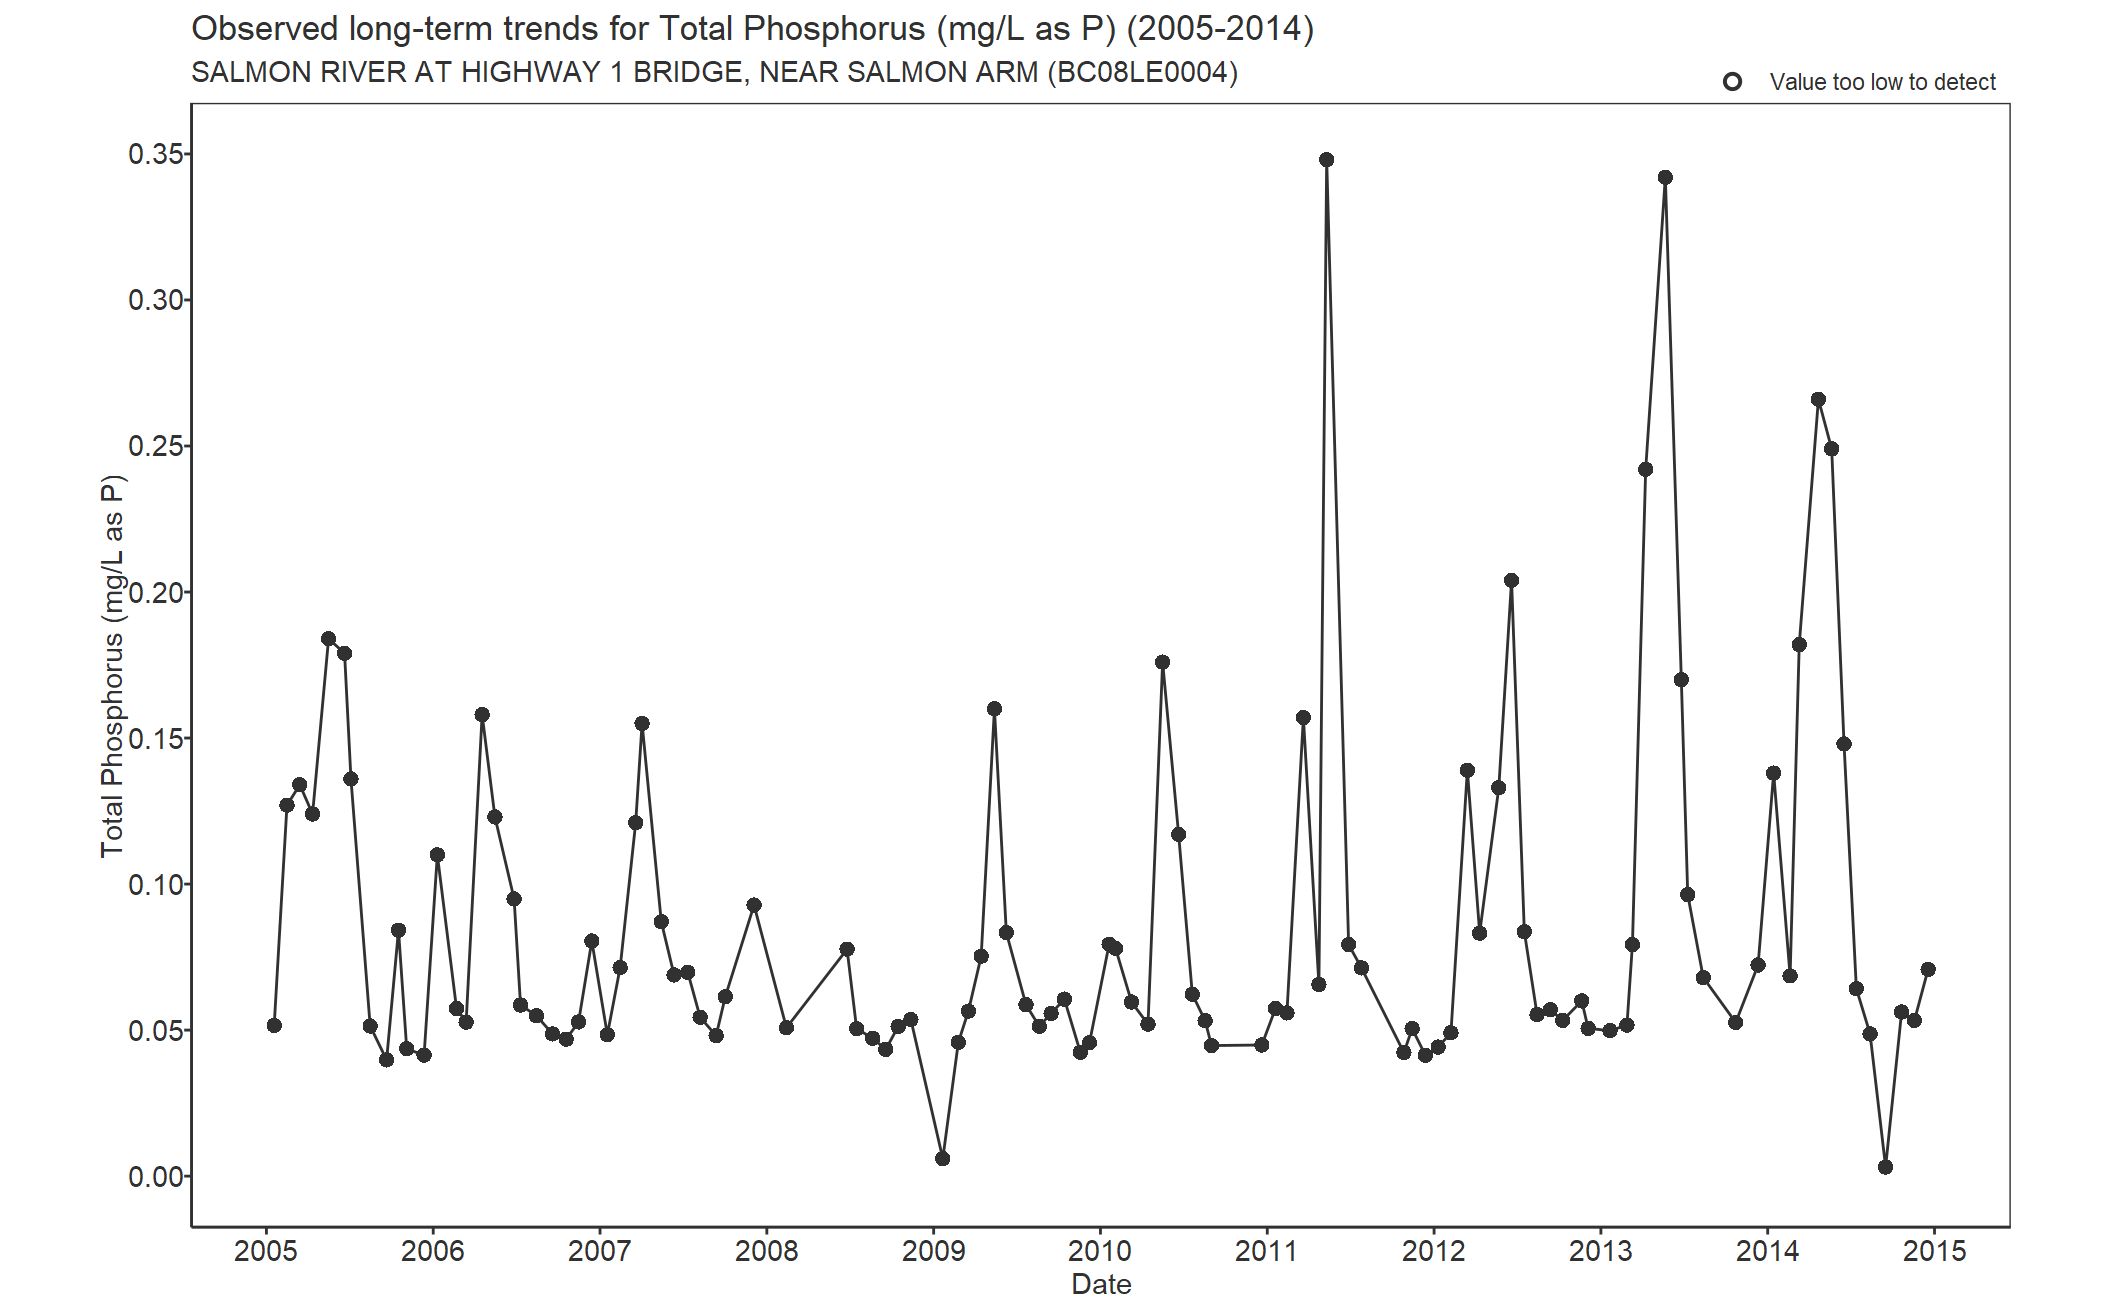 Observed long-term trends for Phosphorus Total (2005-2014)